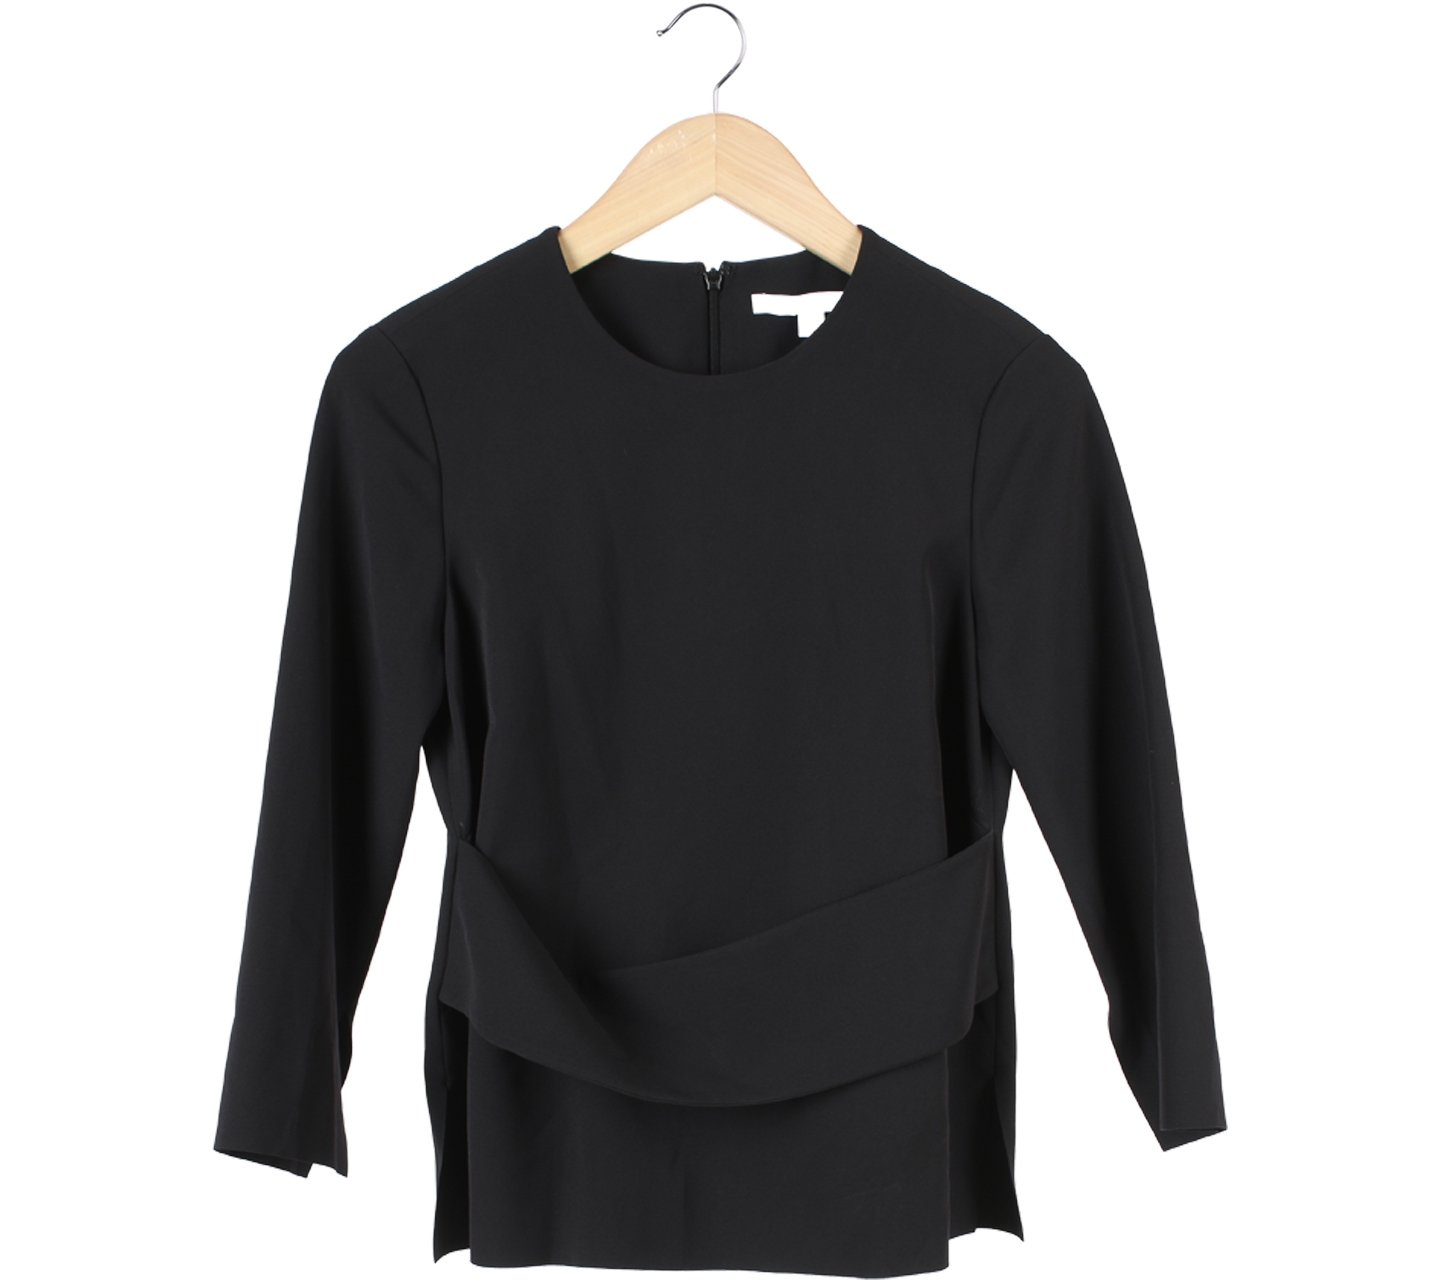 & Other Stories Black Blouse